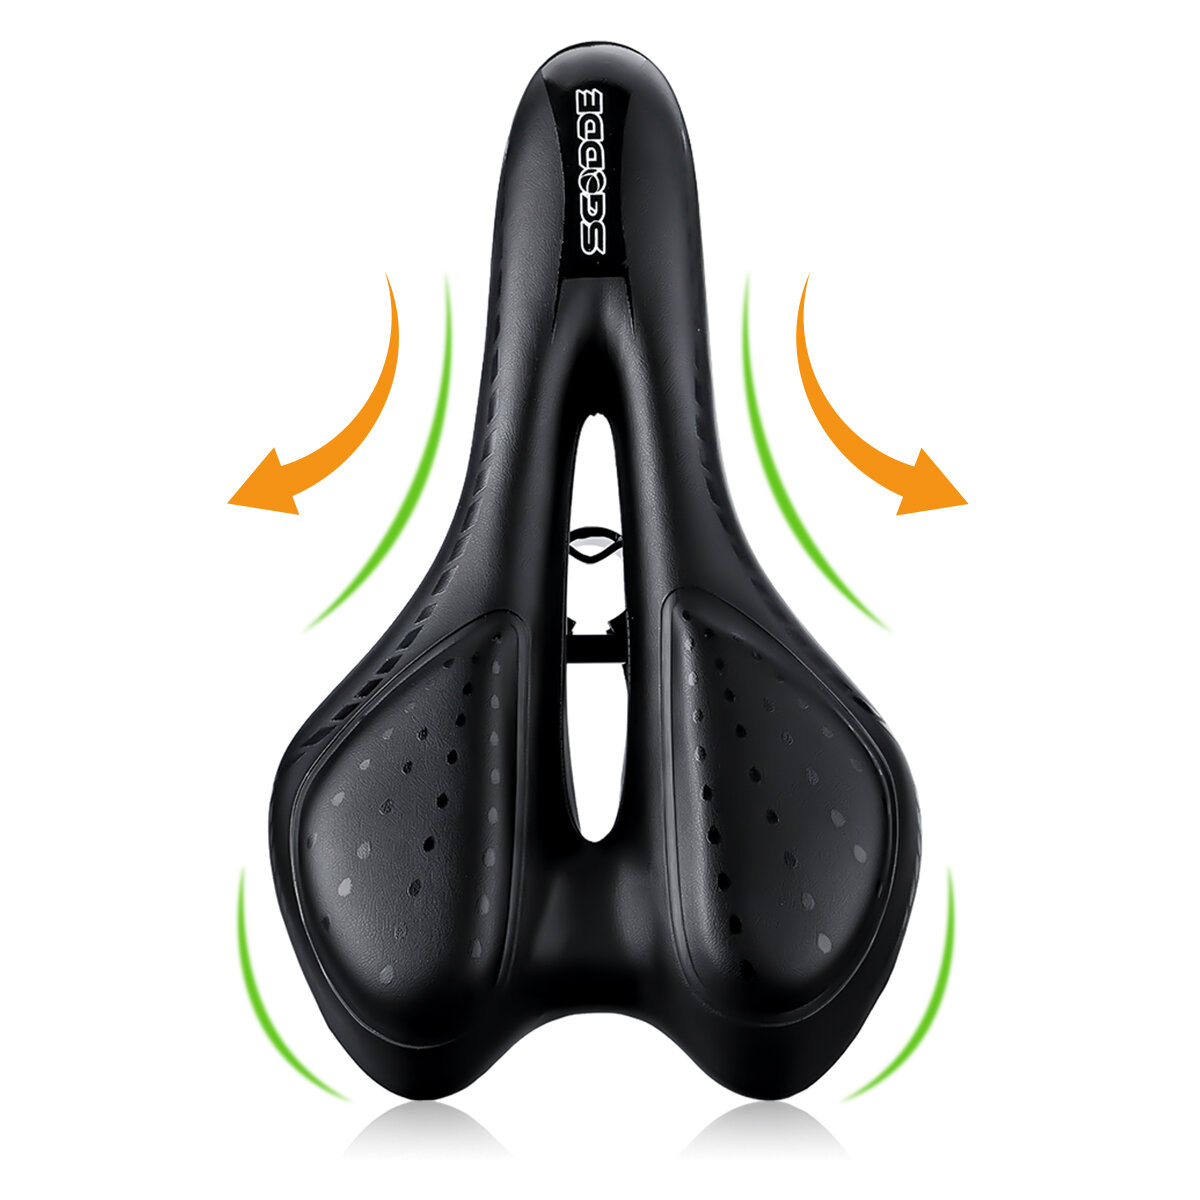 SGODDE Comfortable Bike Seat-Gel Waterproof Bicycle Saddle with Central Relief Zone and Ergonomics Design for Mountain B